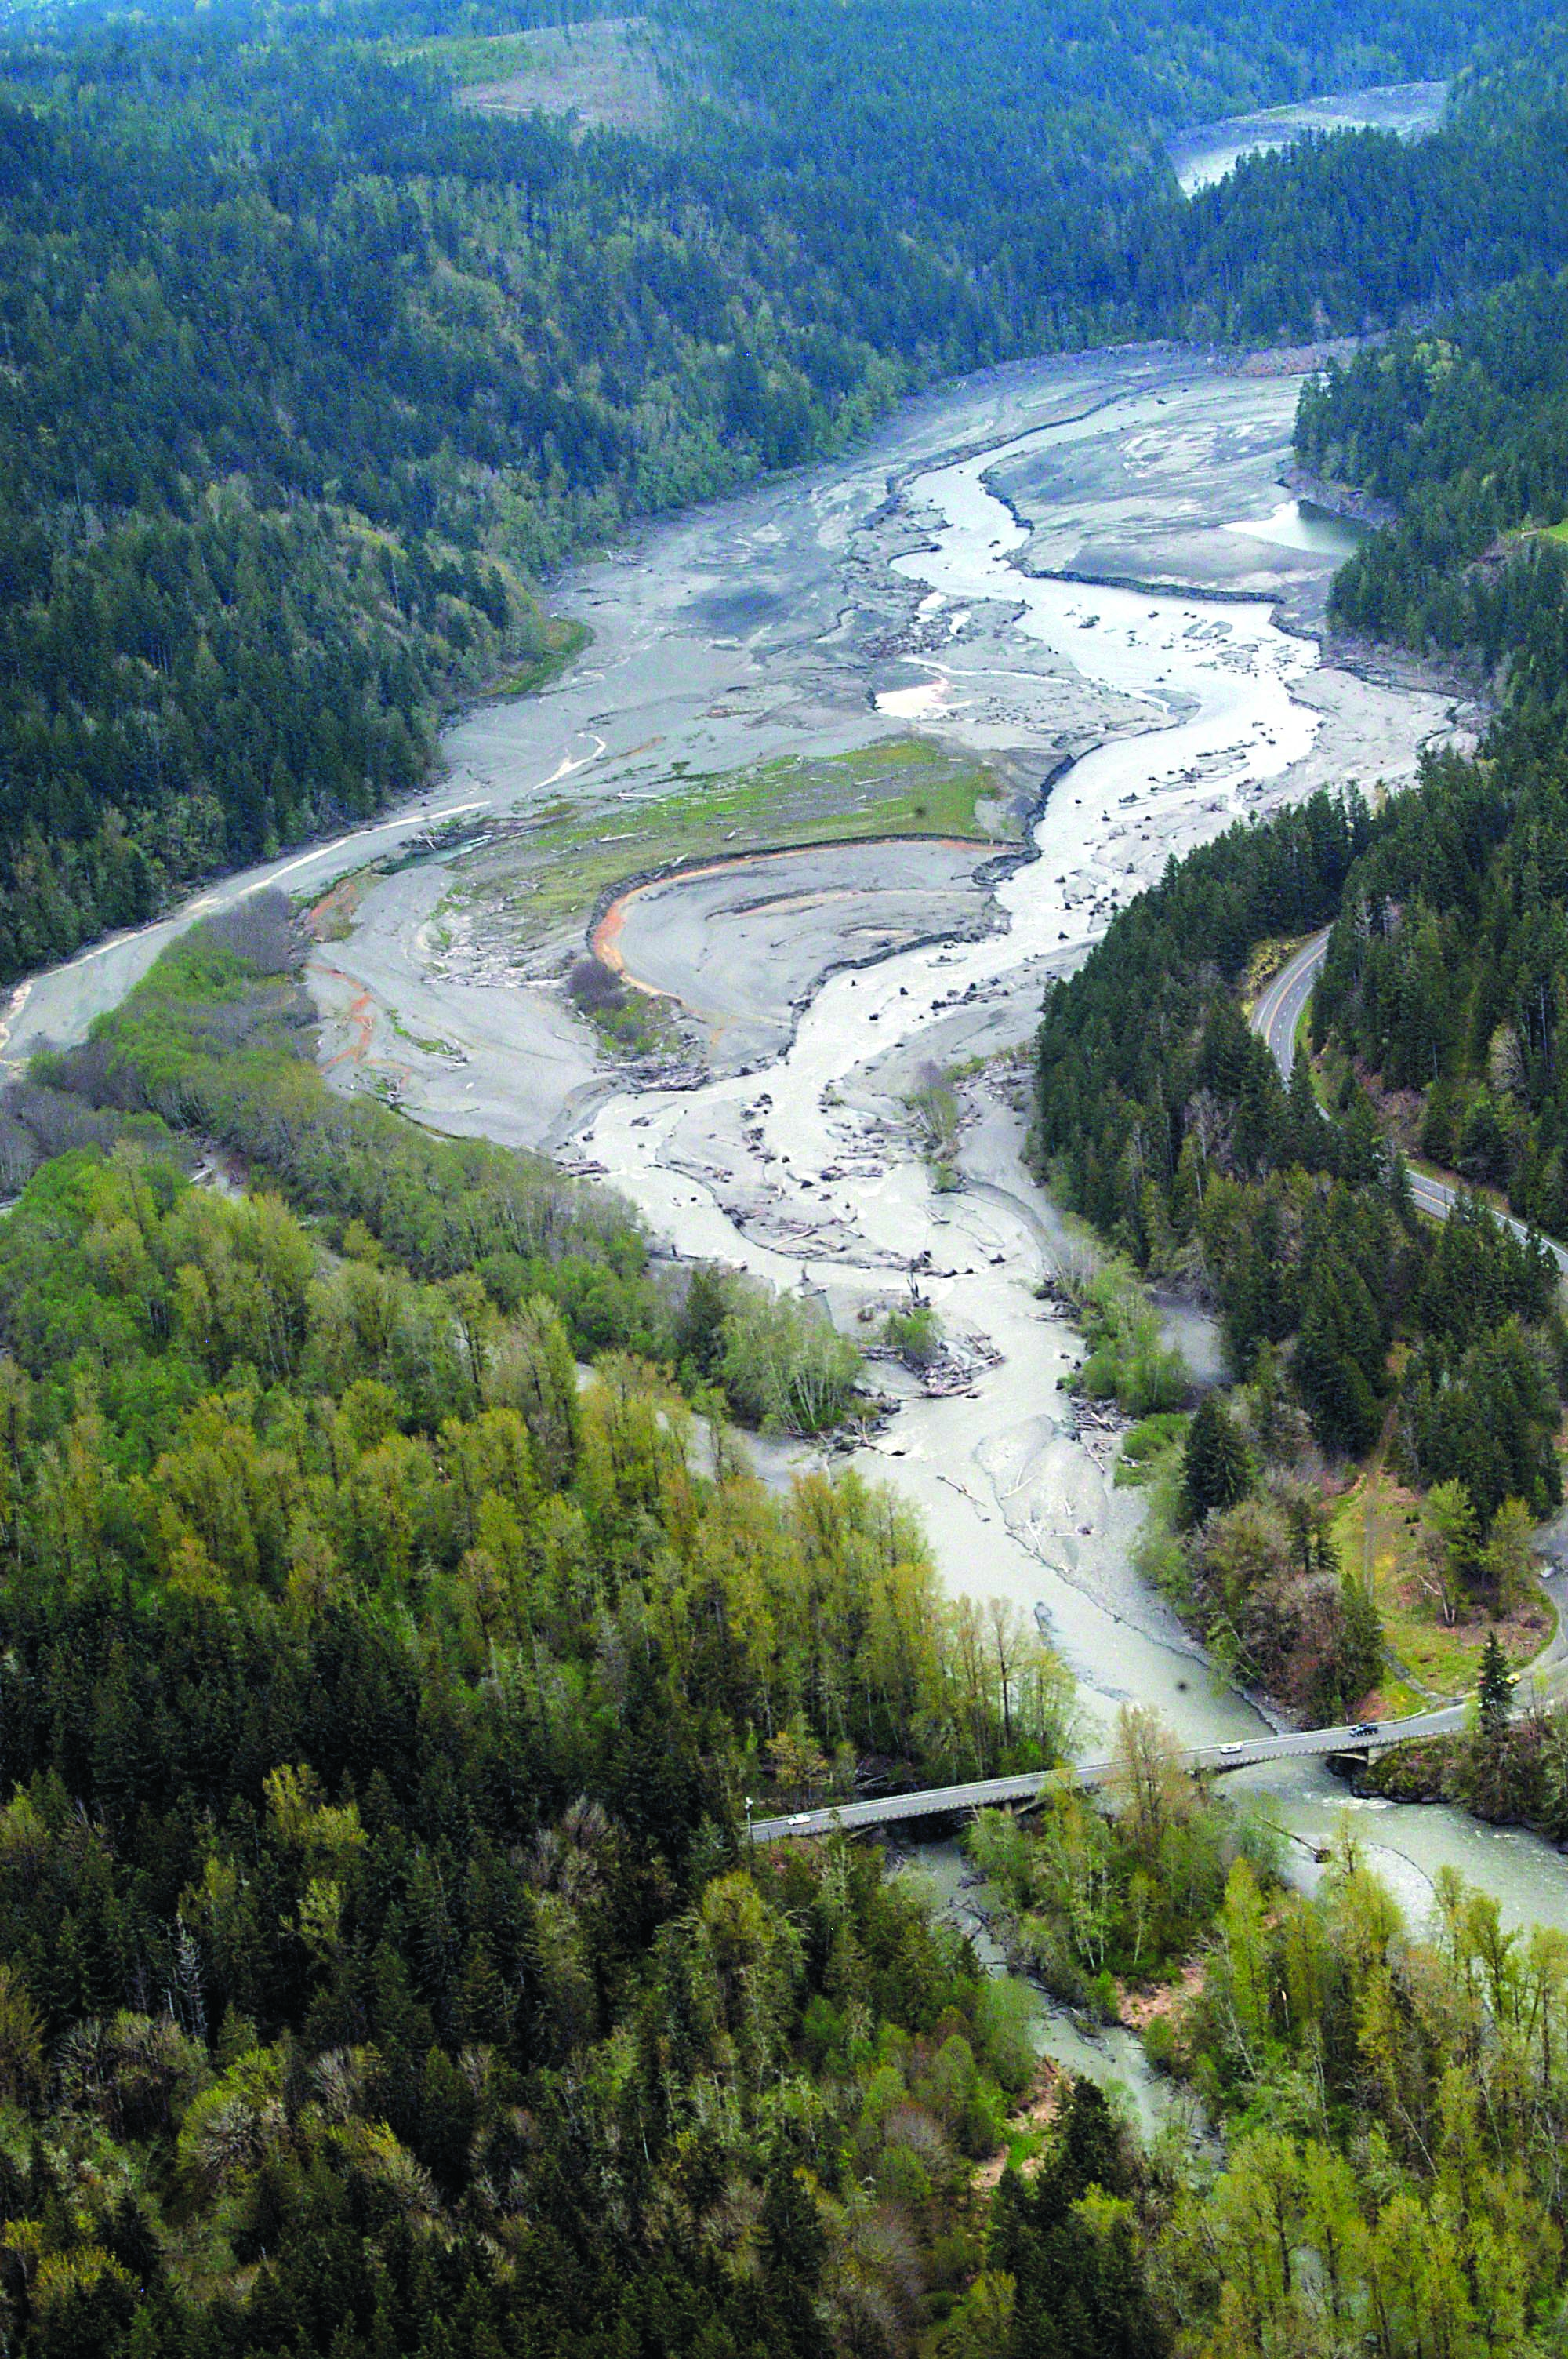 The Elwha River braids its way through what used to be Lake Aldwell behind the former Elwha Dam. With the dam now removed